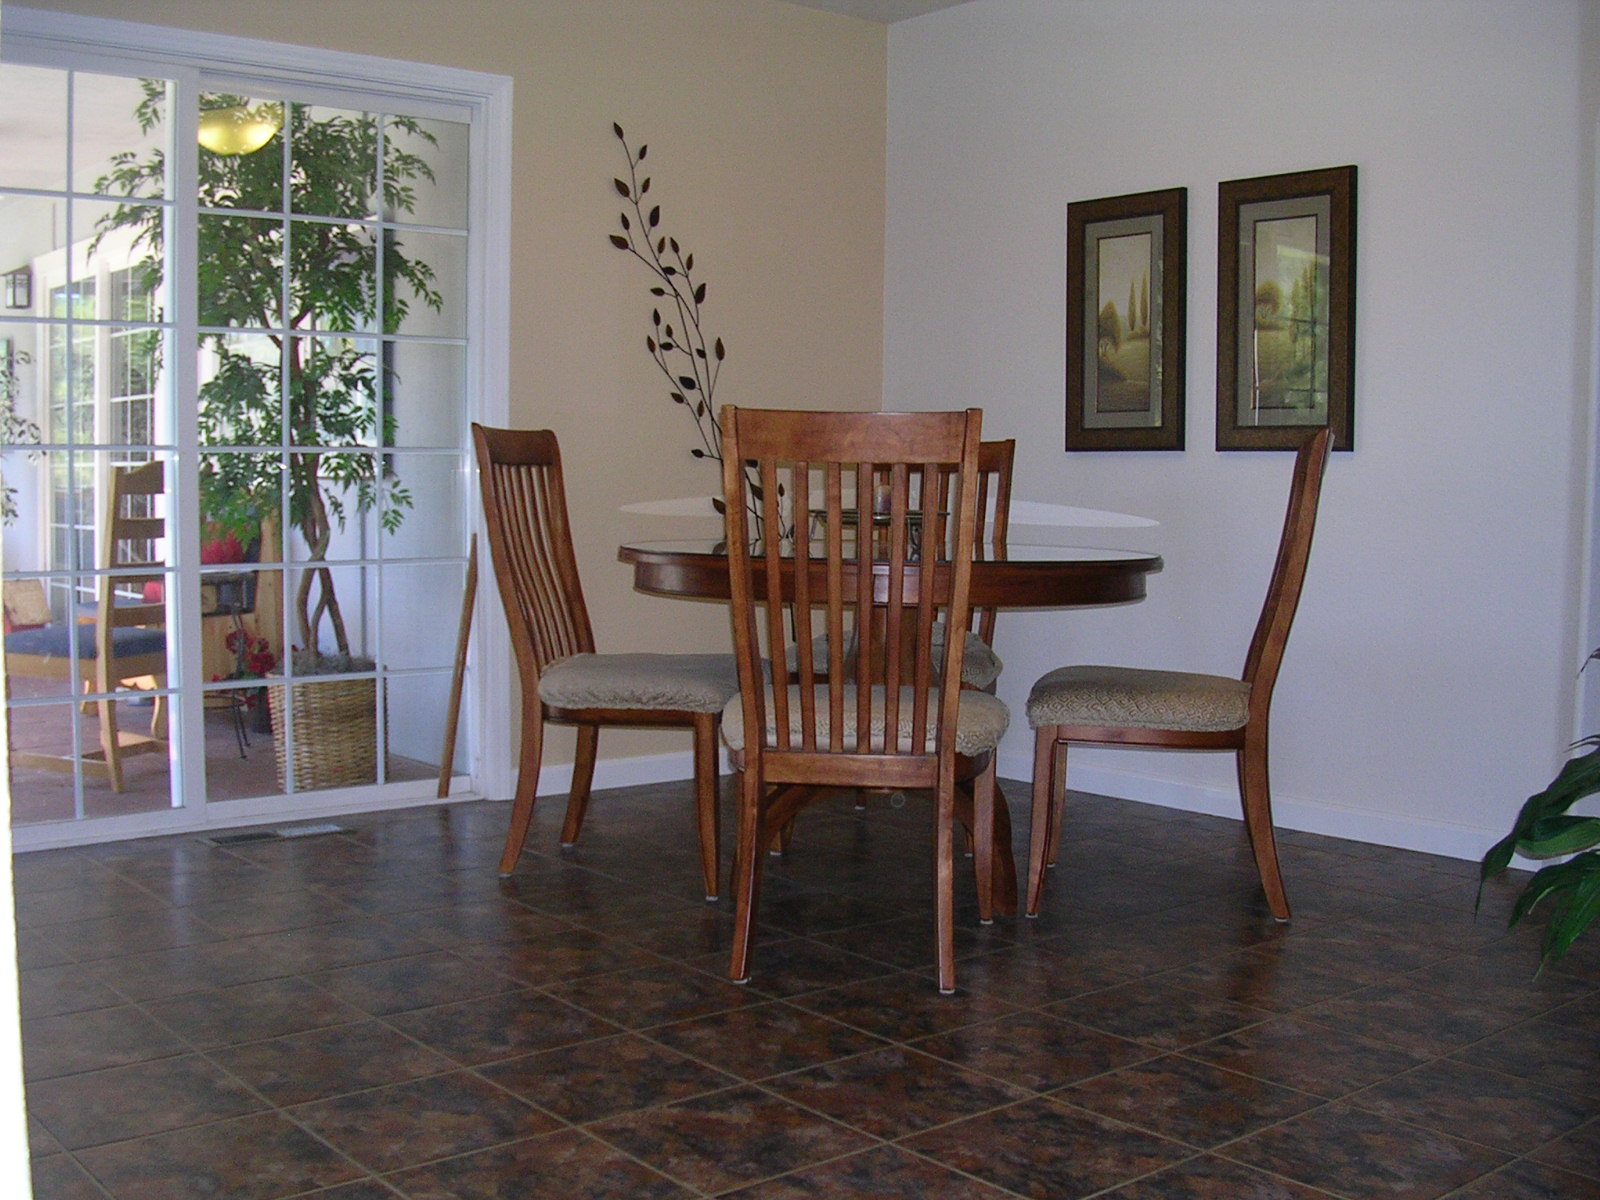 Dining area with slider to screened porch.